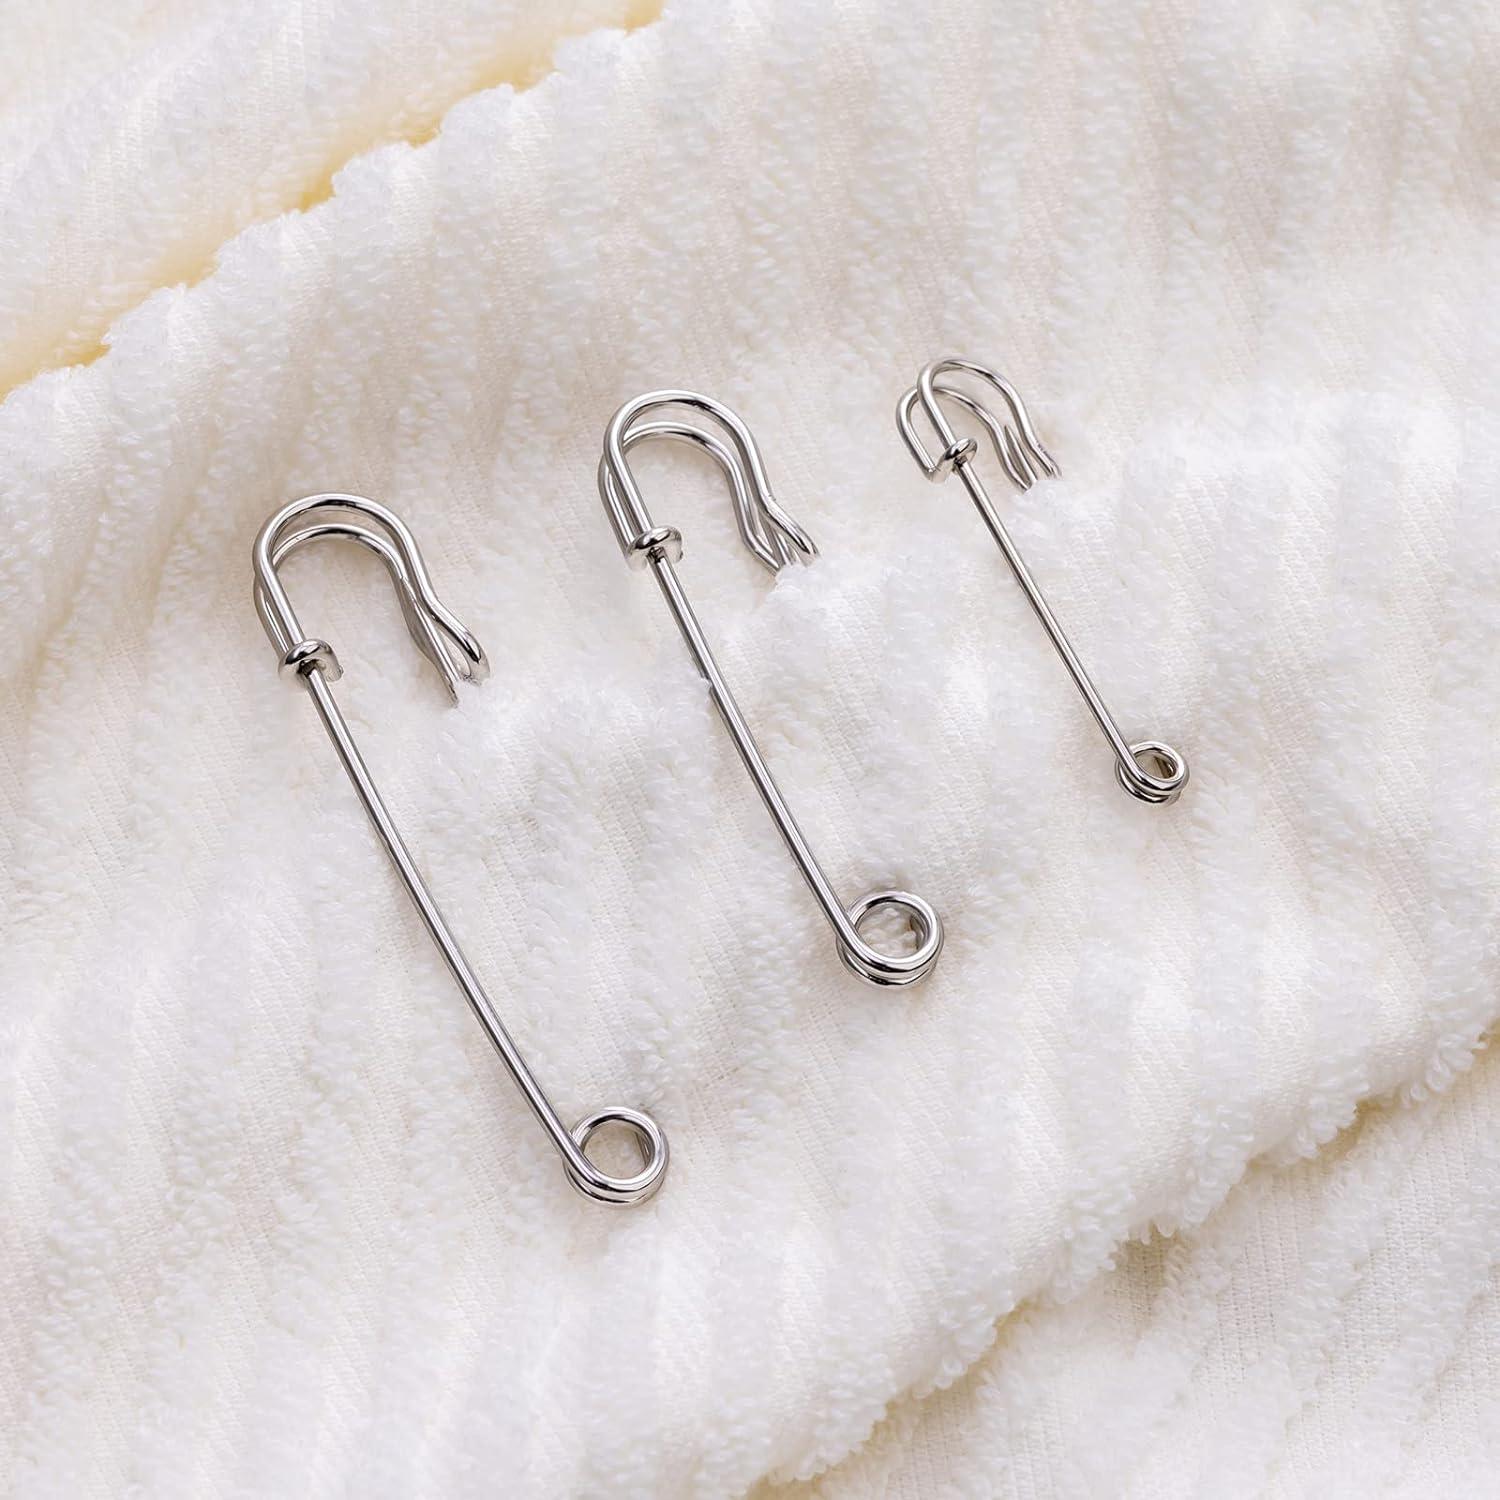 40 Pack Black Large Safety Pins, 2 Heavy Duty Blanket Pins for All Kinds of Handicrafts, Clothing, Blankets and Other Materials As Well As DIY